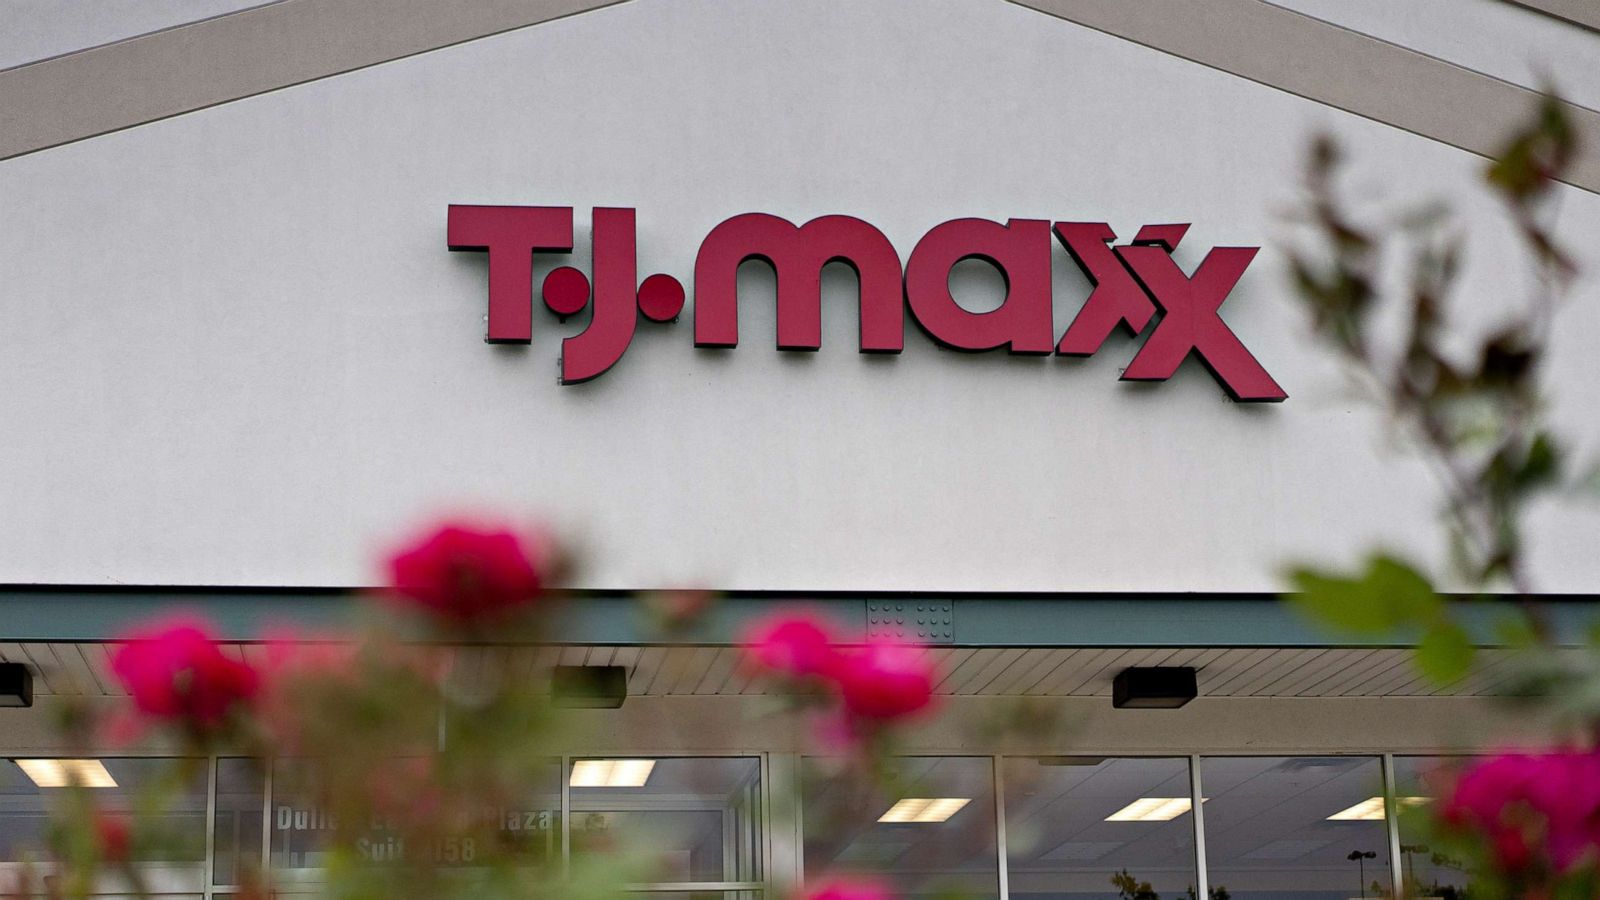 T.J. Maxx parent company to pay $13 million for selling recalled products -  ABC News